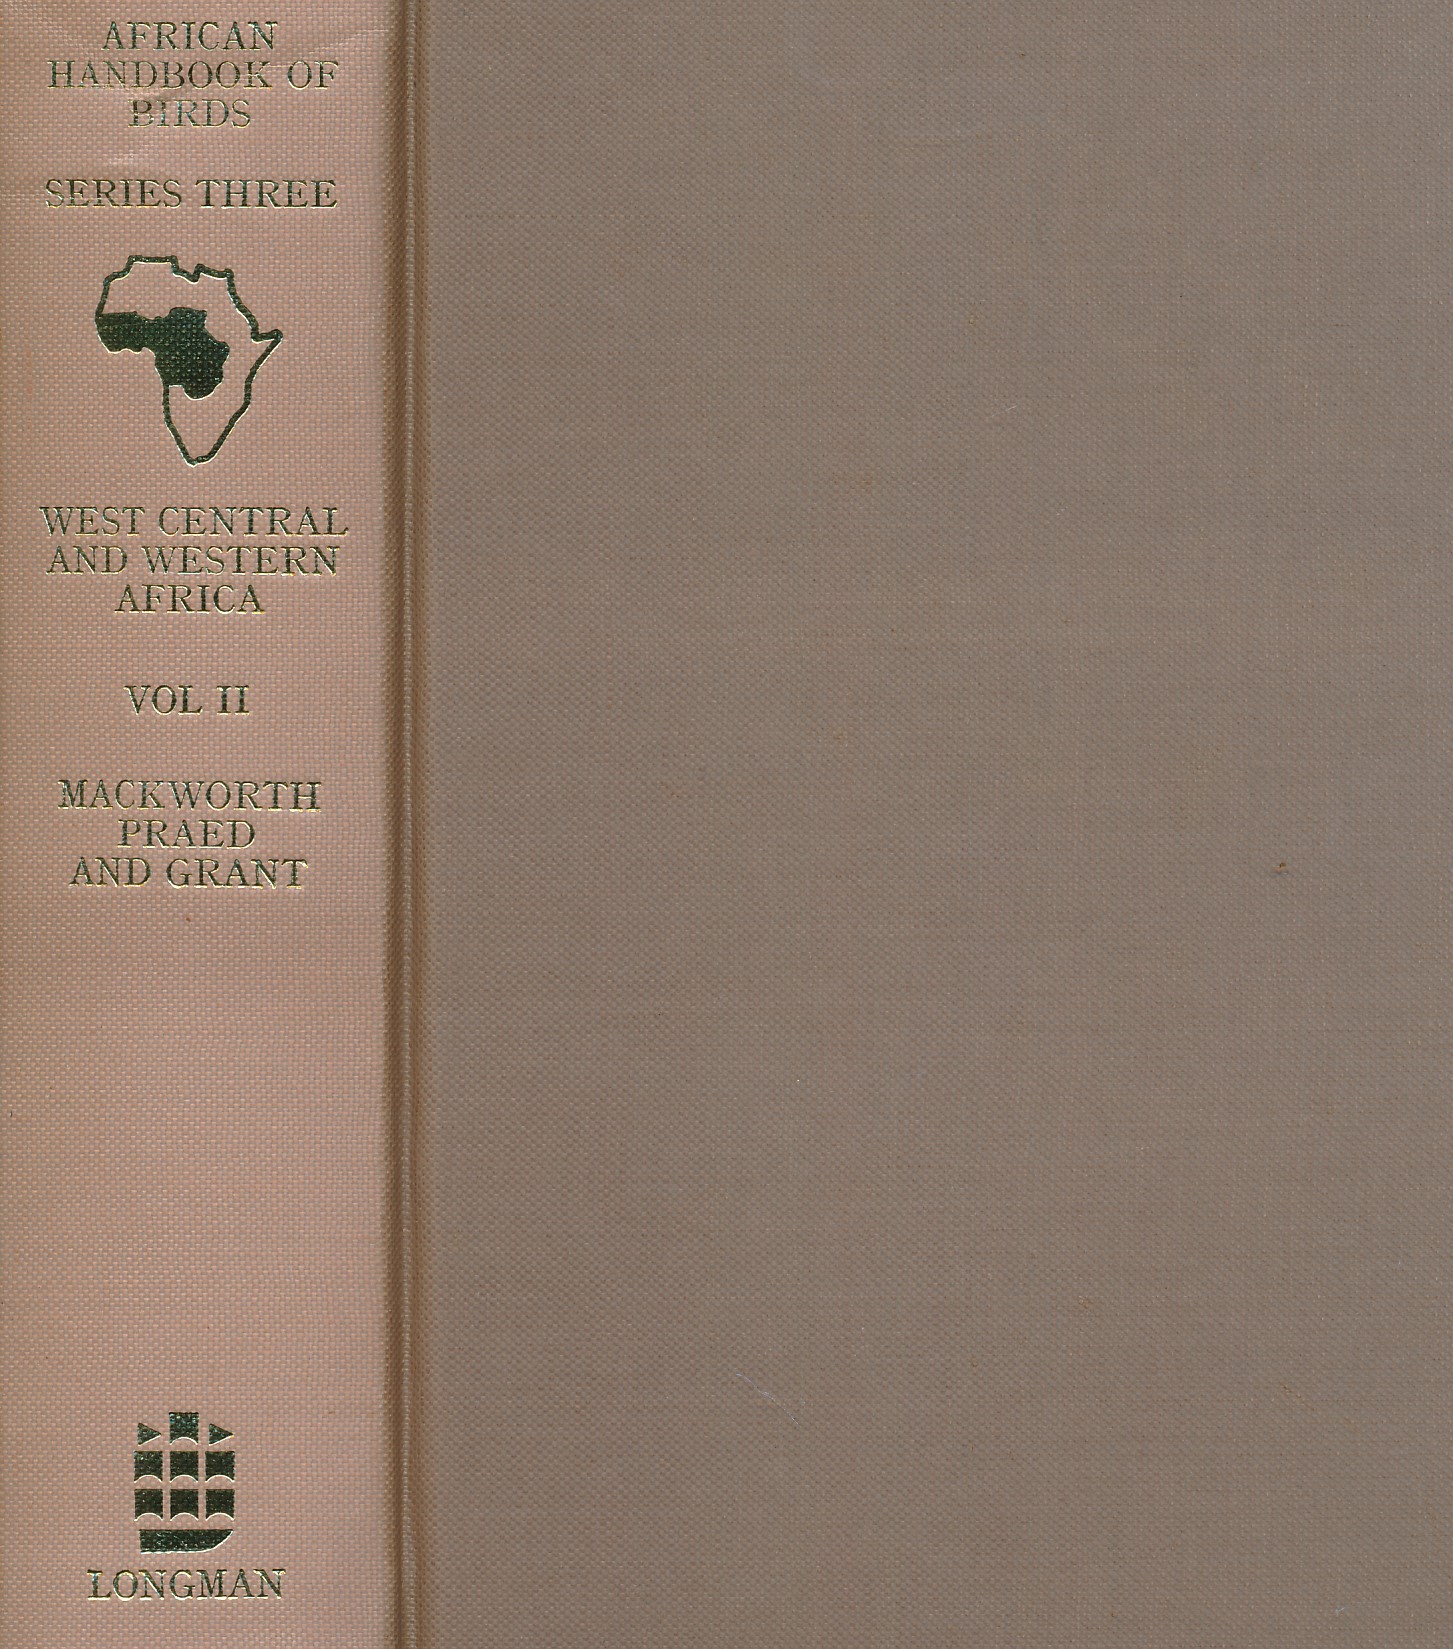 Birds of West Central and Western Africa. Series Three. Volume II.